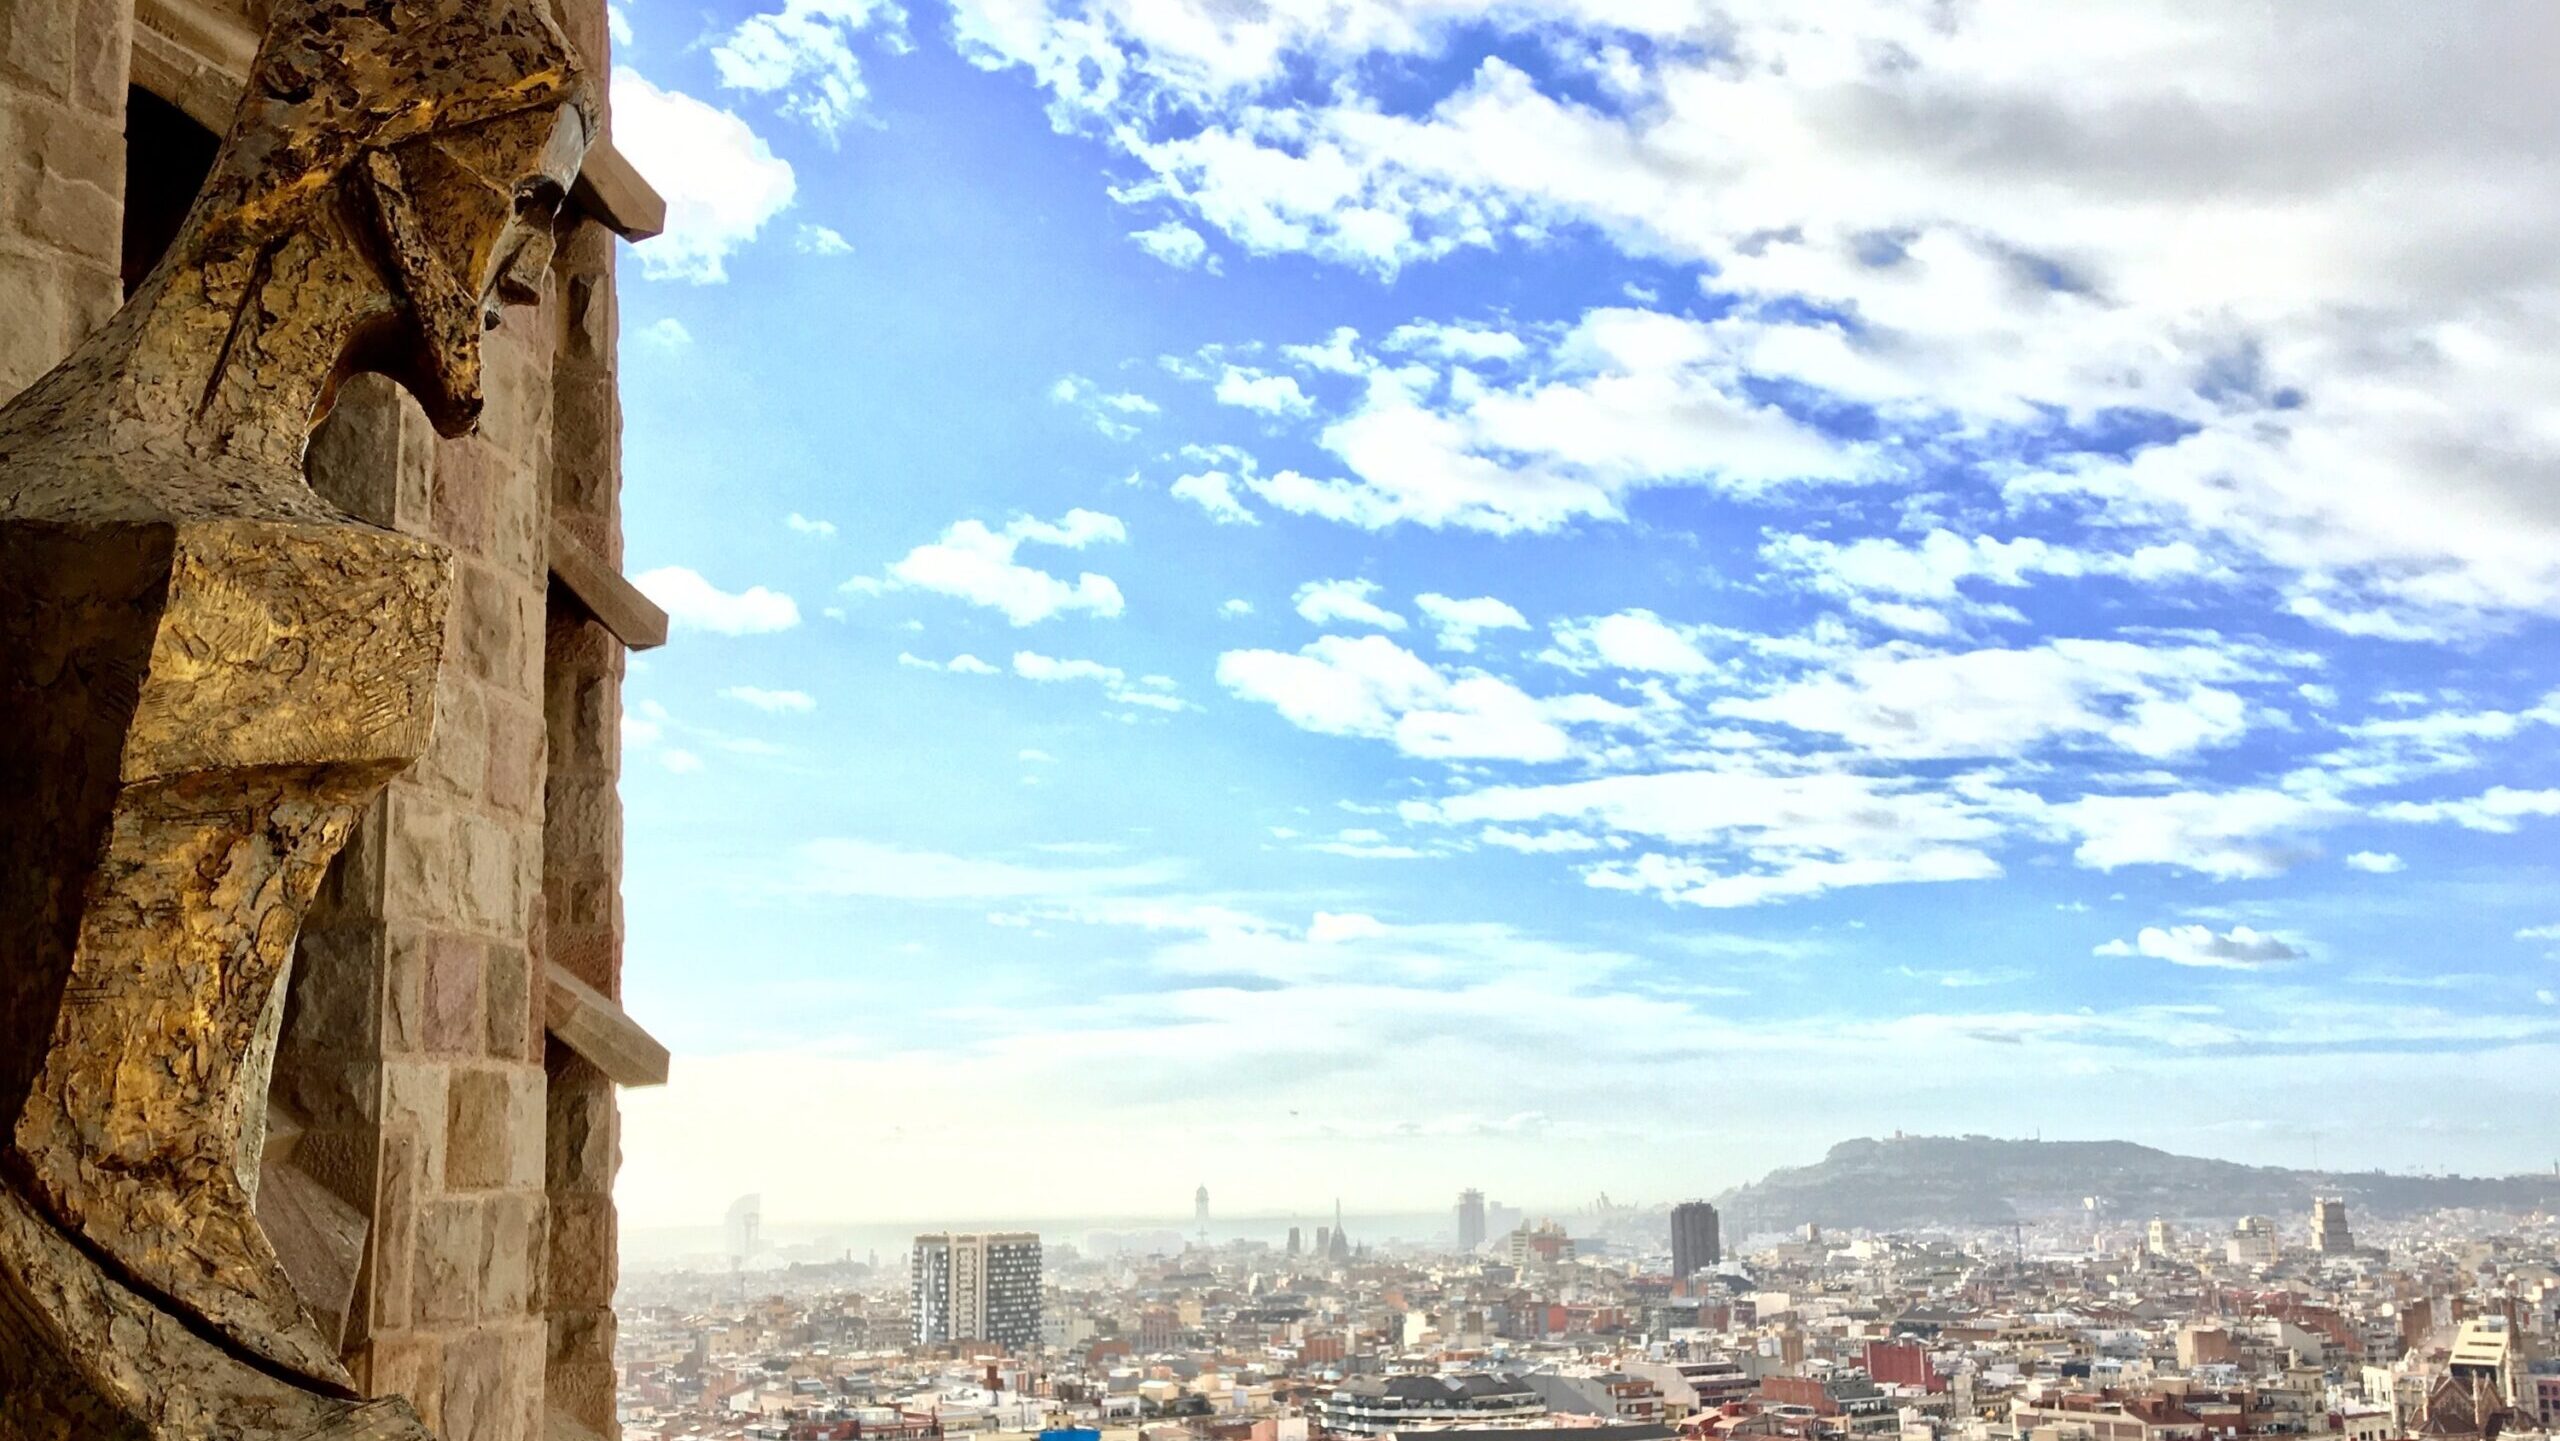 Barcelona: tech innovation hub makes it a top city in Spain for developers